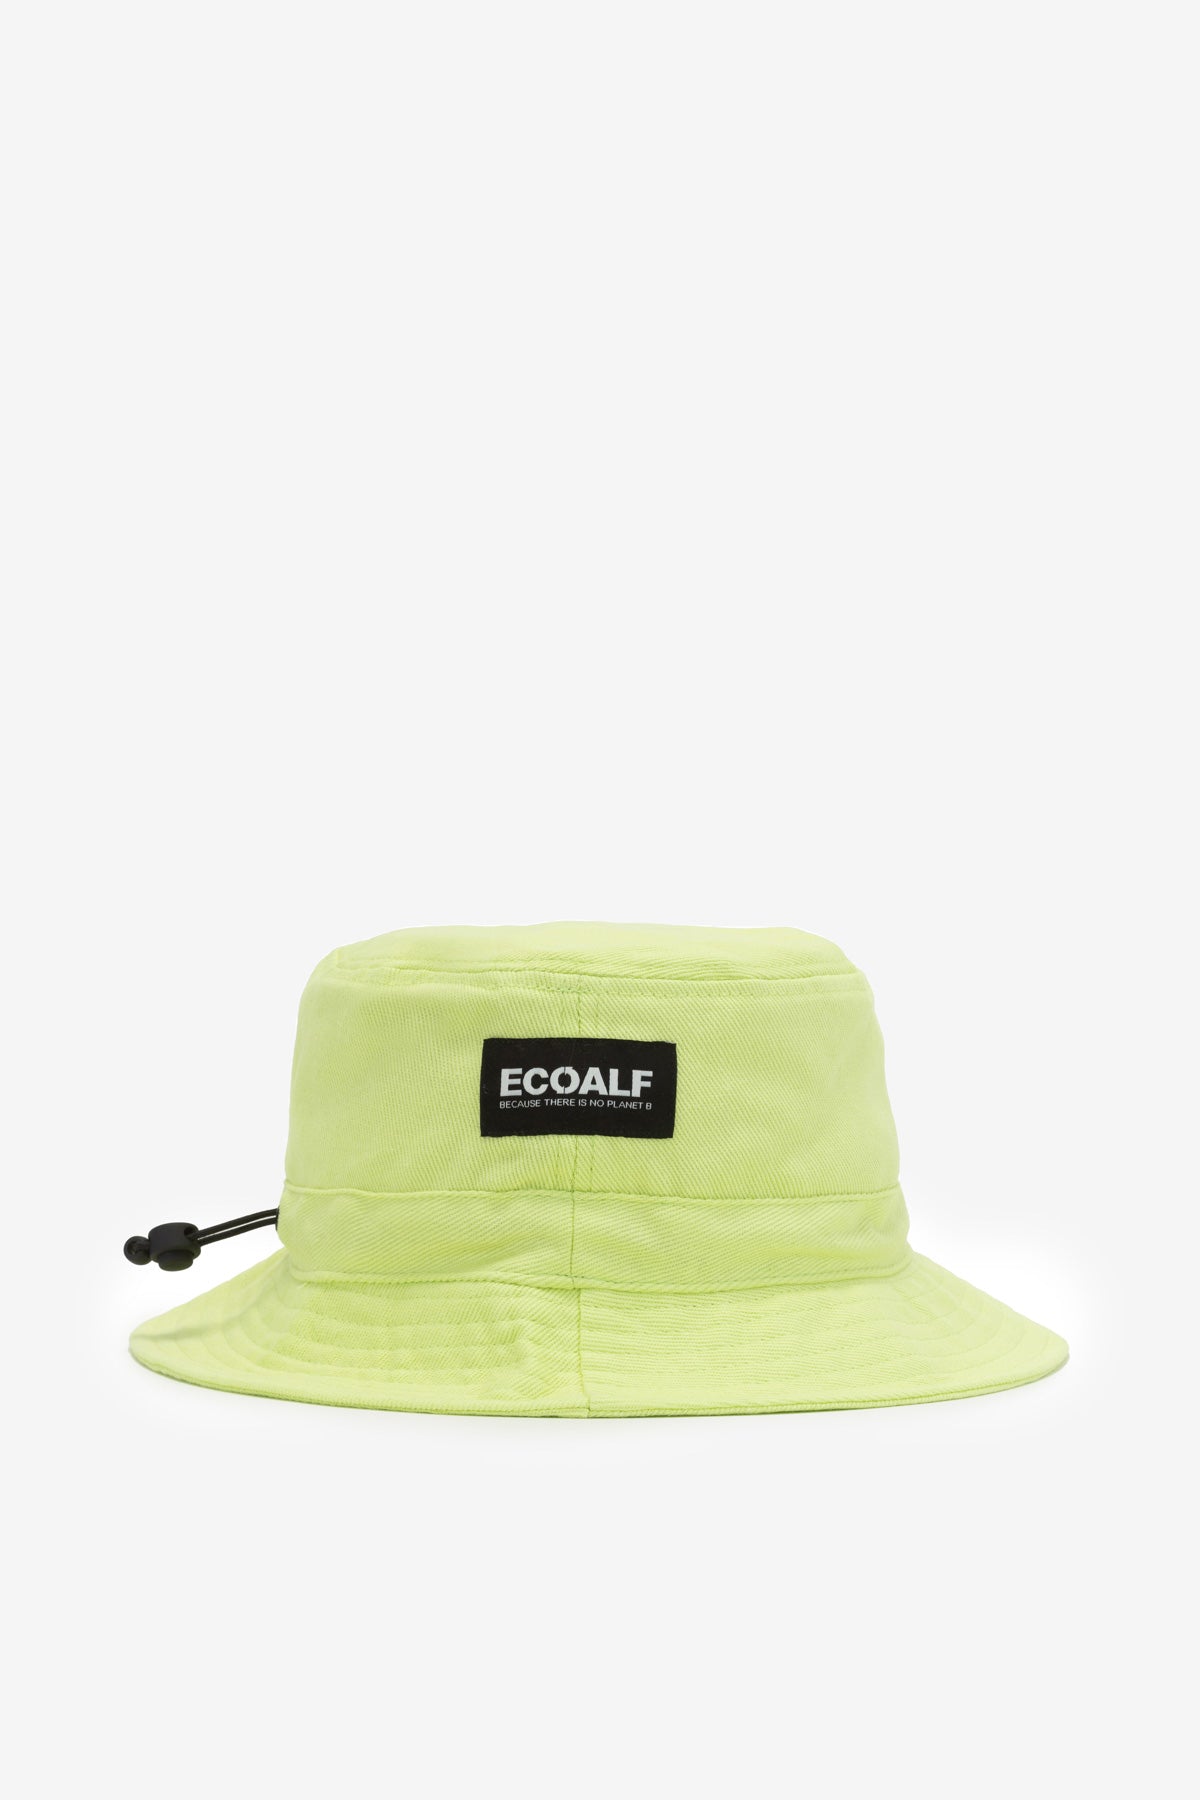 CAPPELLO FISHER BAS VERDE LIME